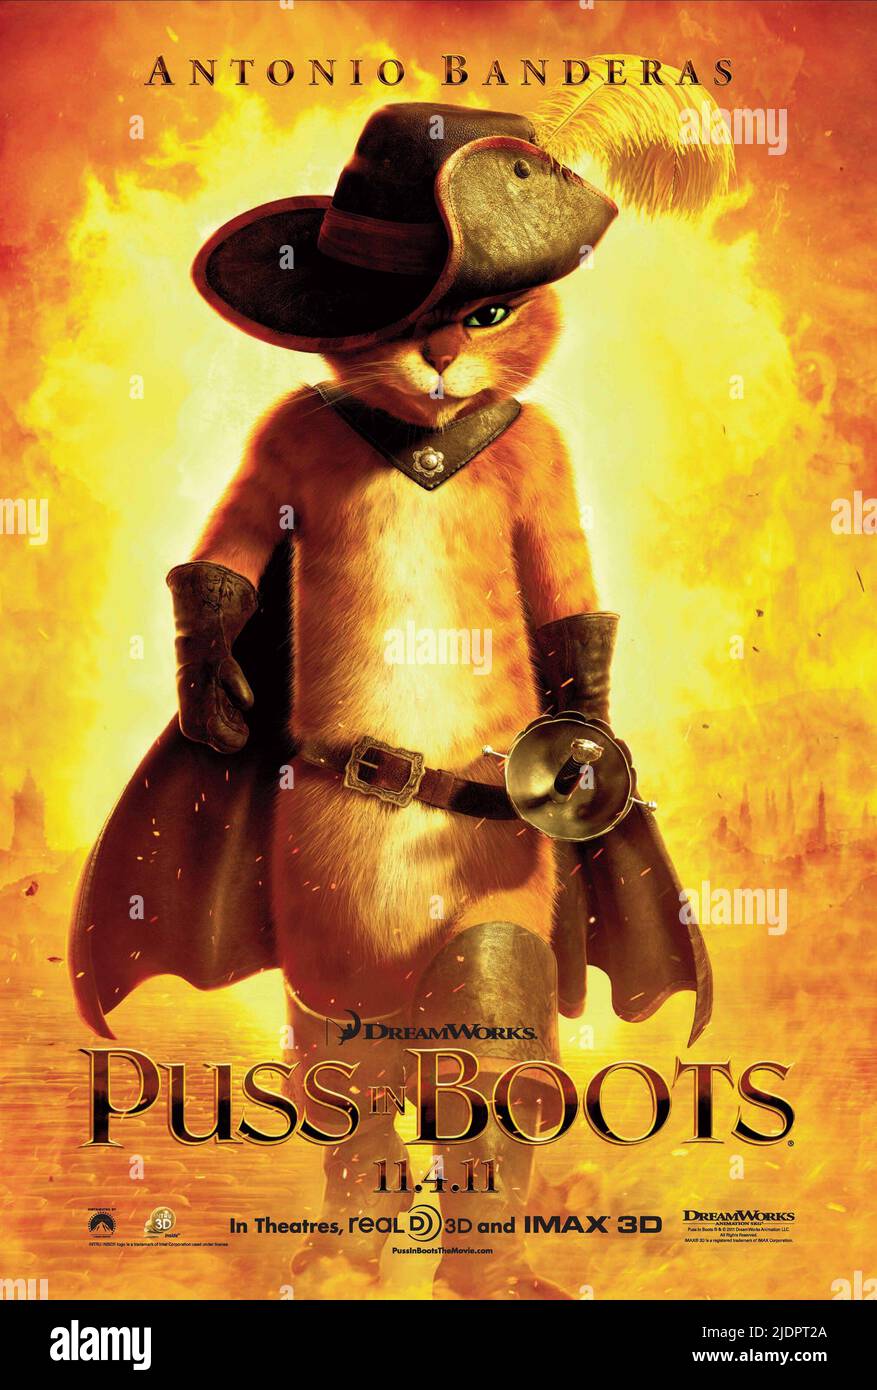 PUSS IN BOOTS POSTER, PUSS IN BOOTS, 2011, Stock Photo